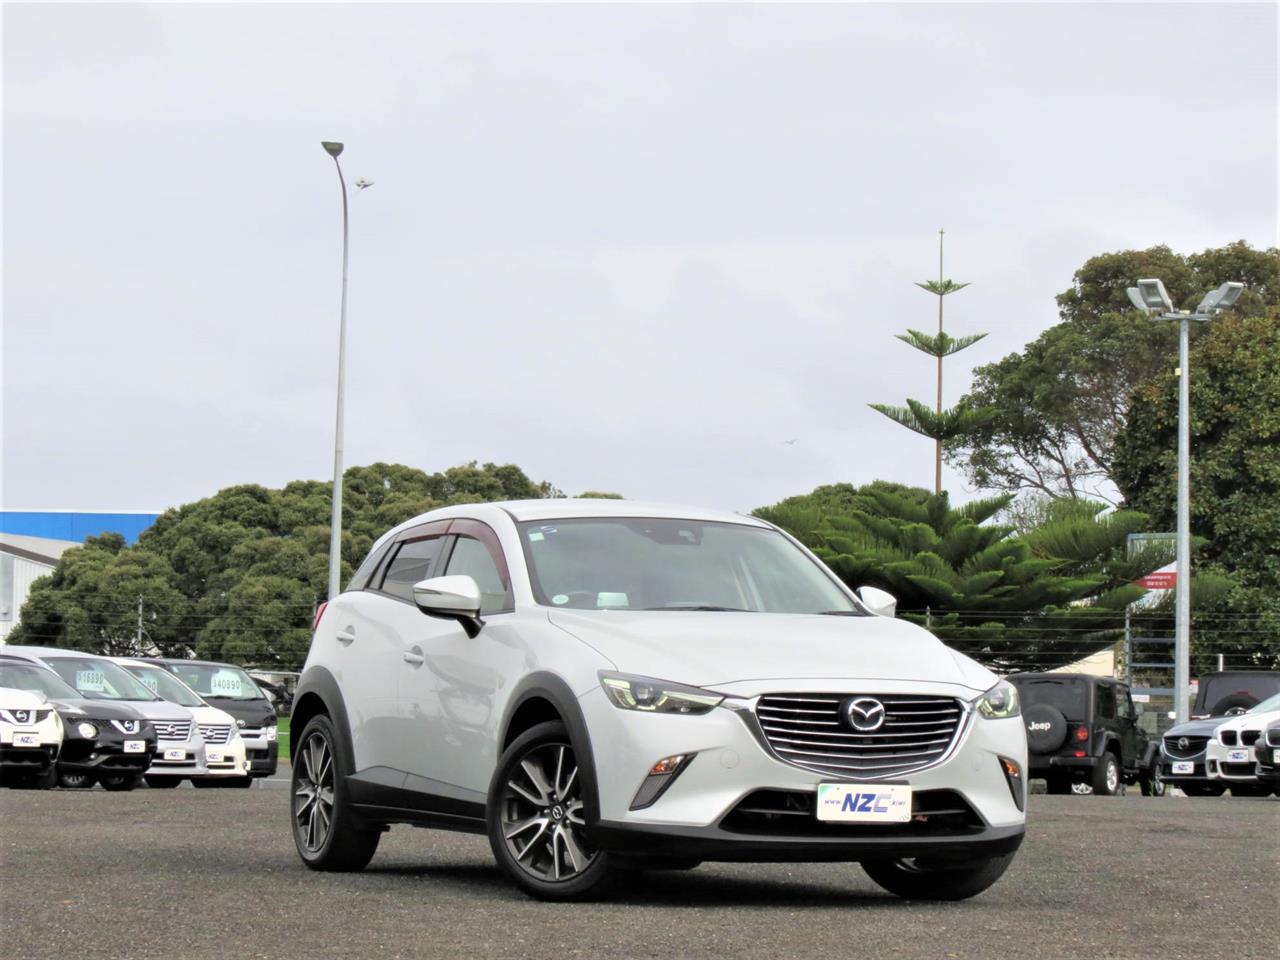 NZC 2015 Mazda CX-3 just arrived to Auckland